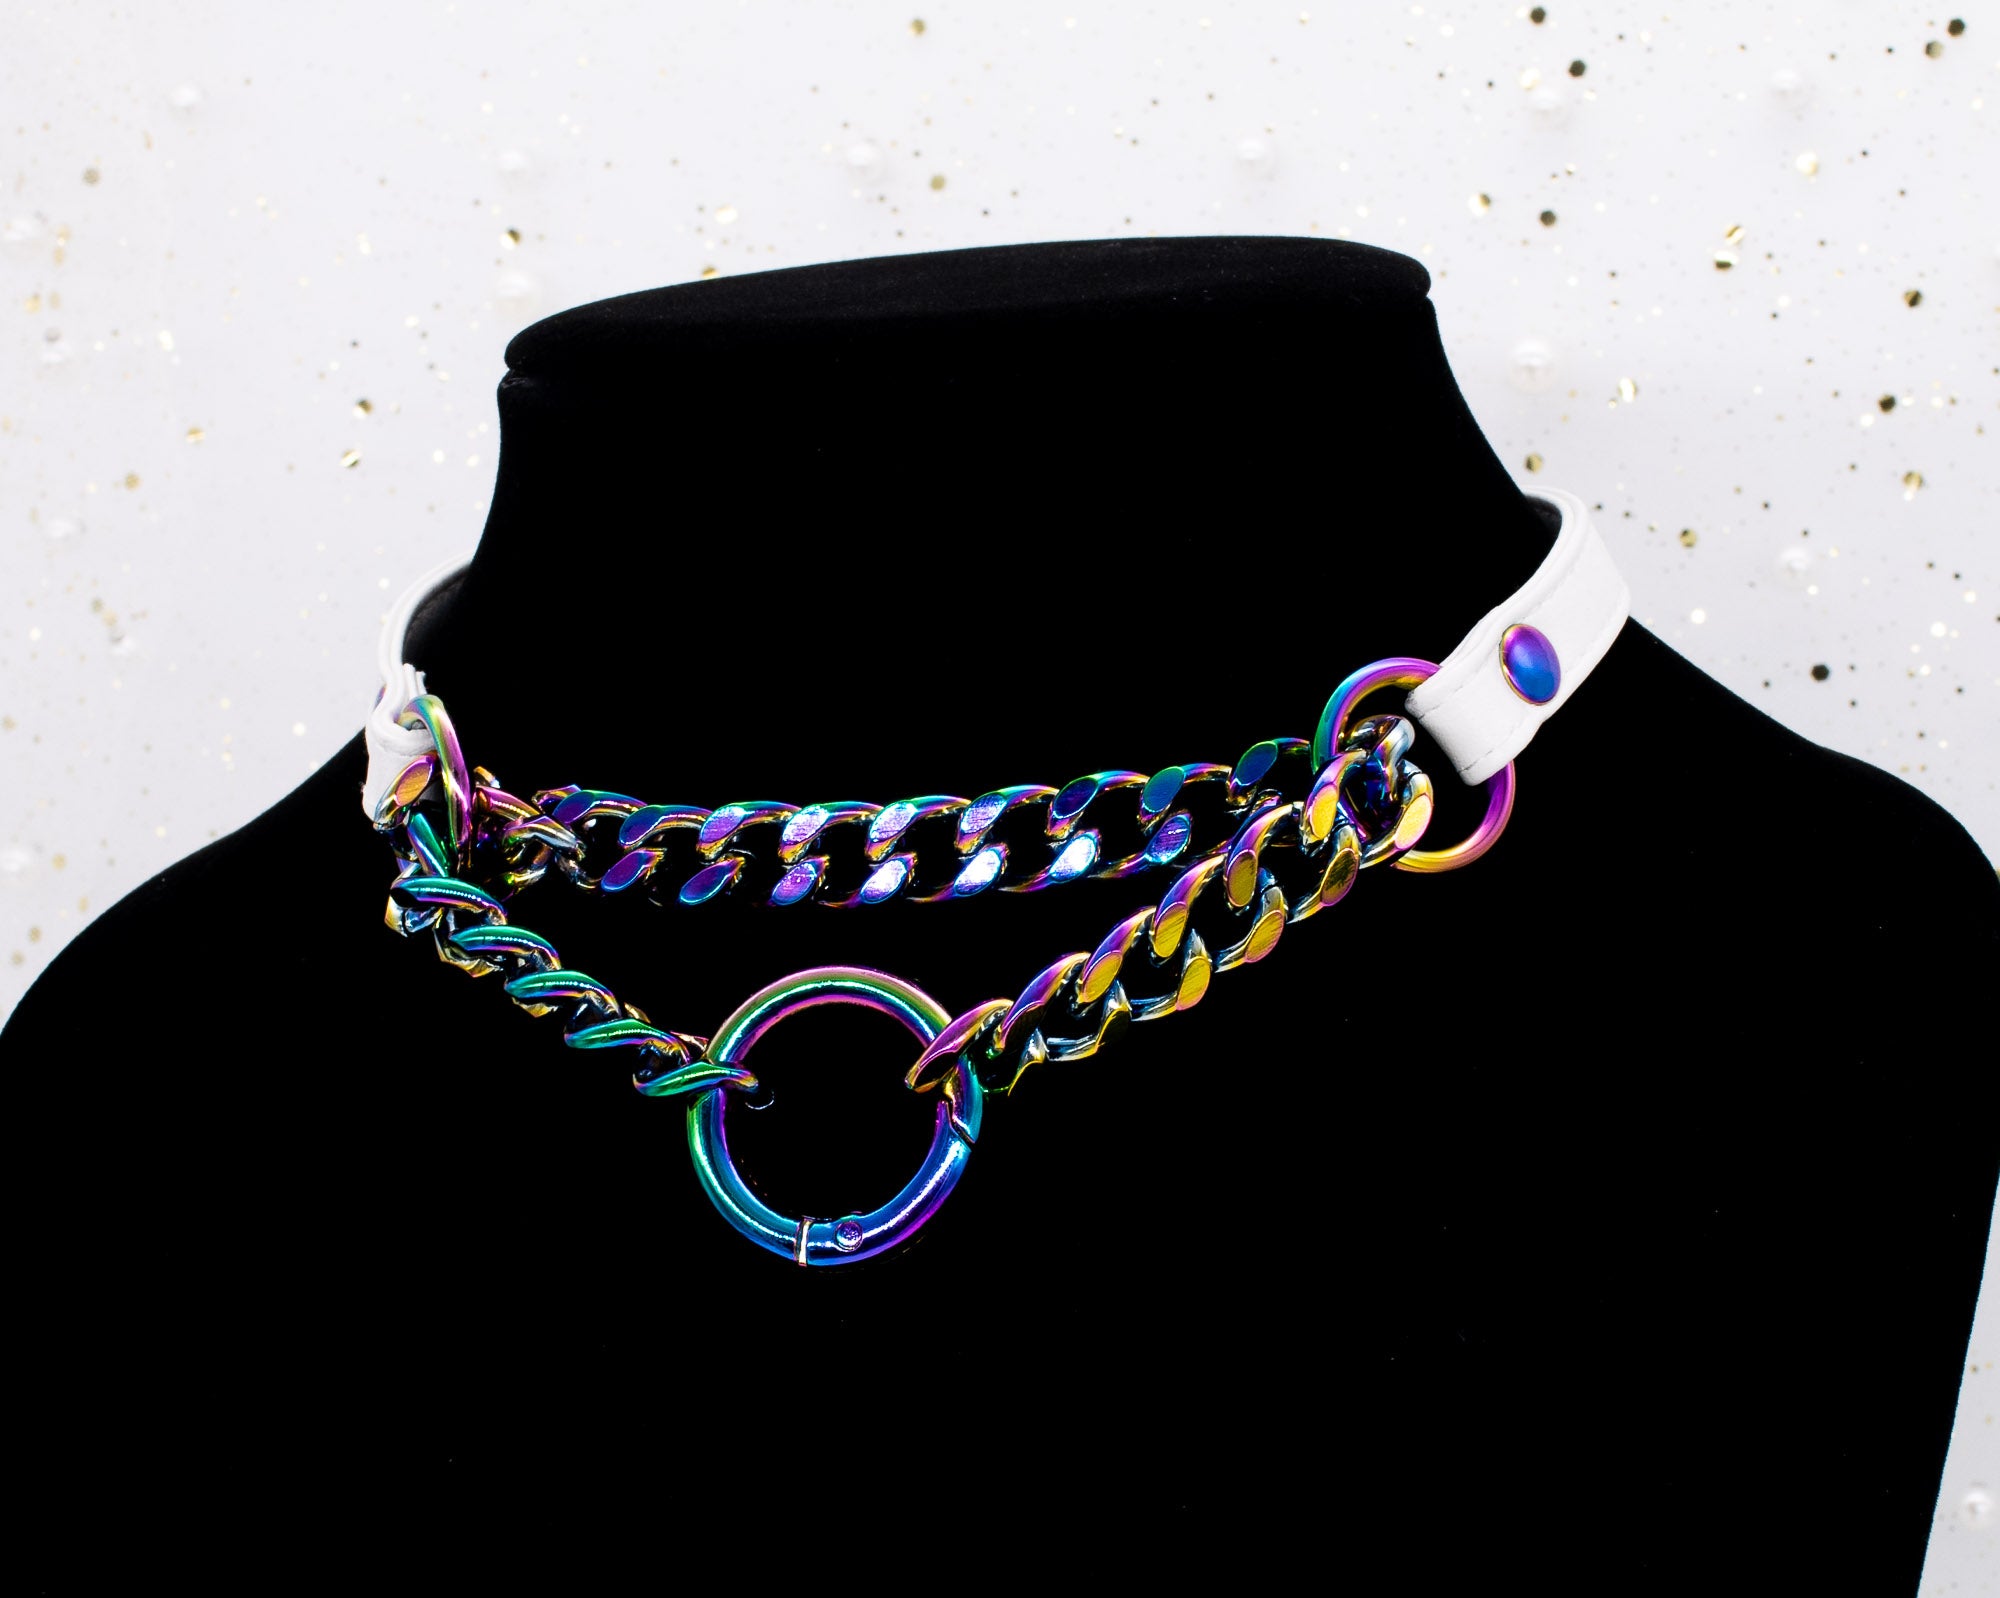 3/8" Front-Closing White Vegan Leather Martingale Collar in Rainbow